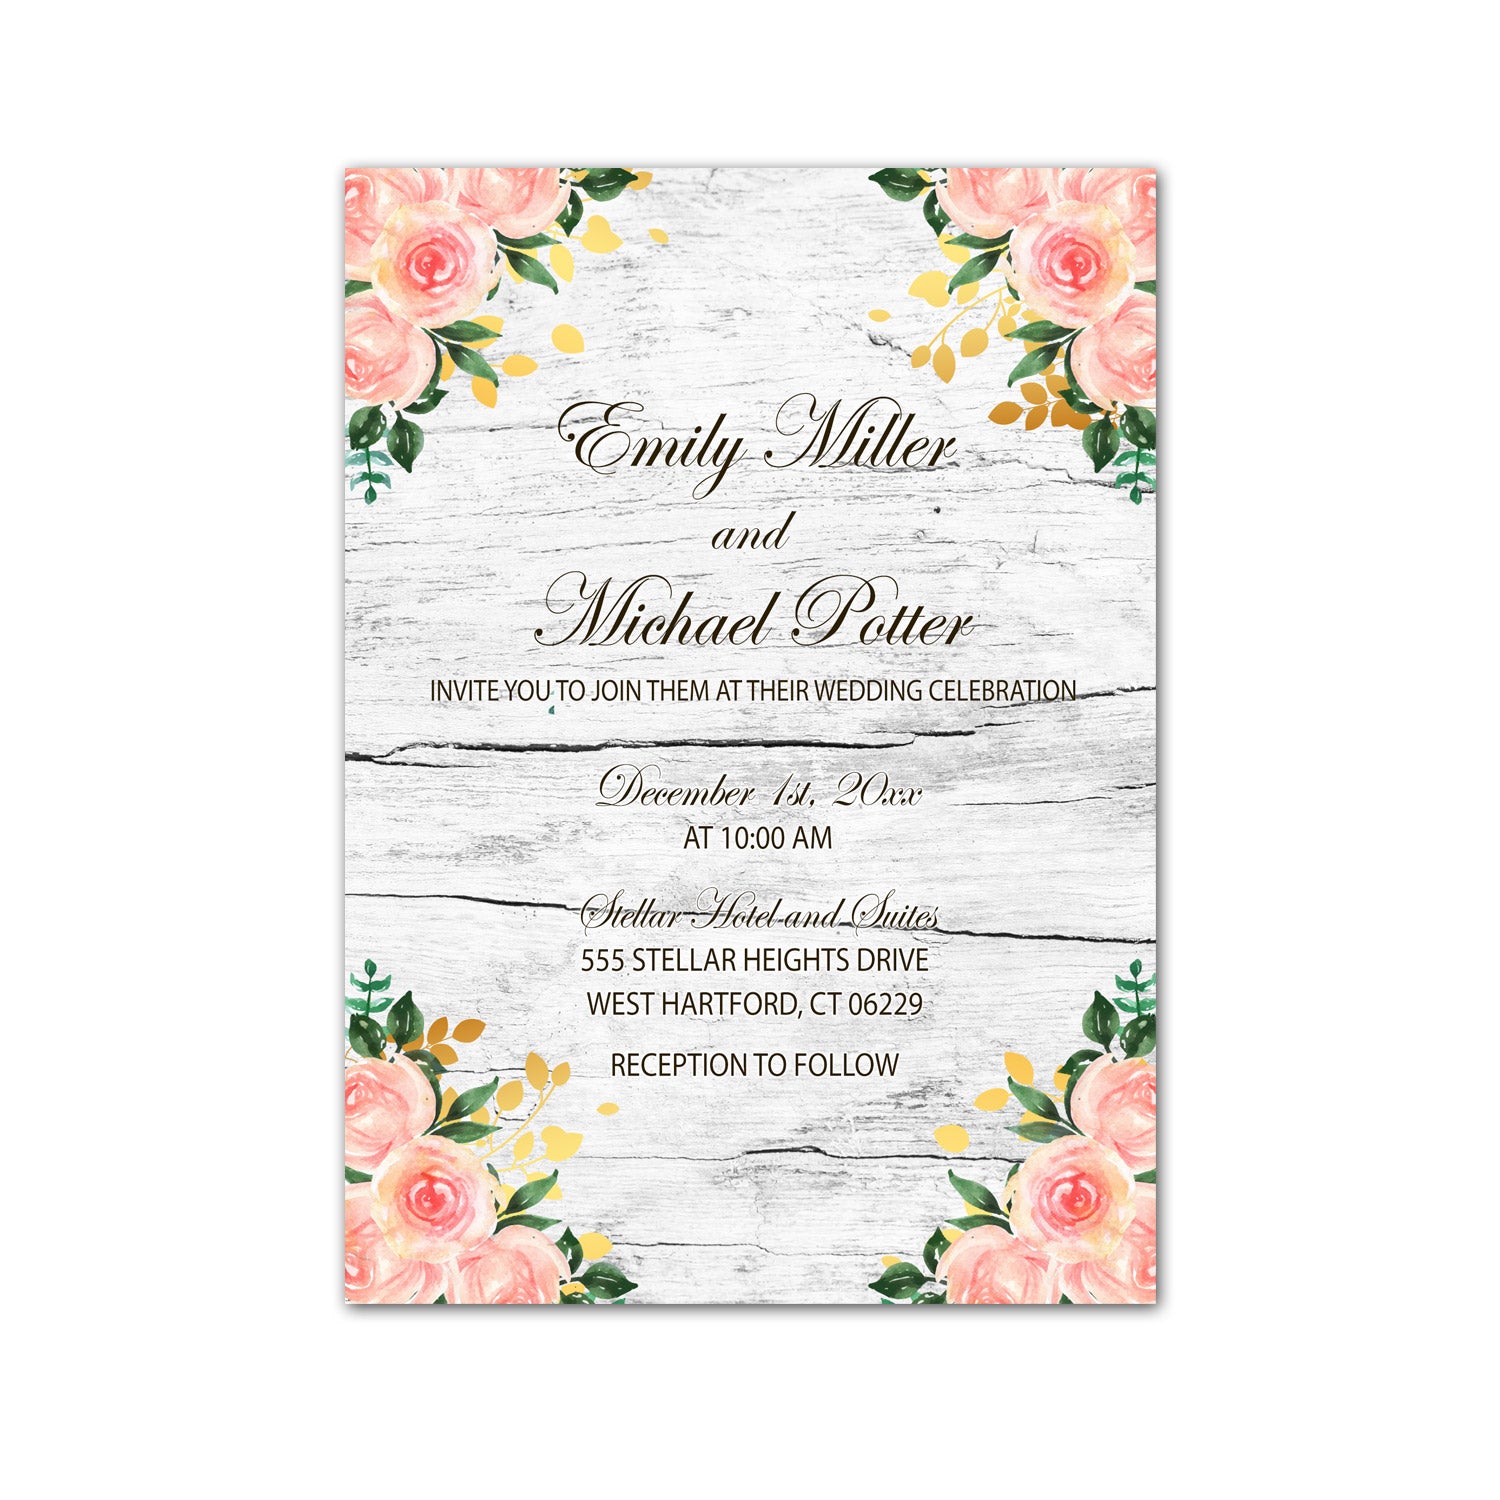 100 Wood Rustic Wedding Invitation Cards Floral Pink